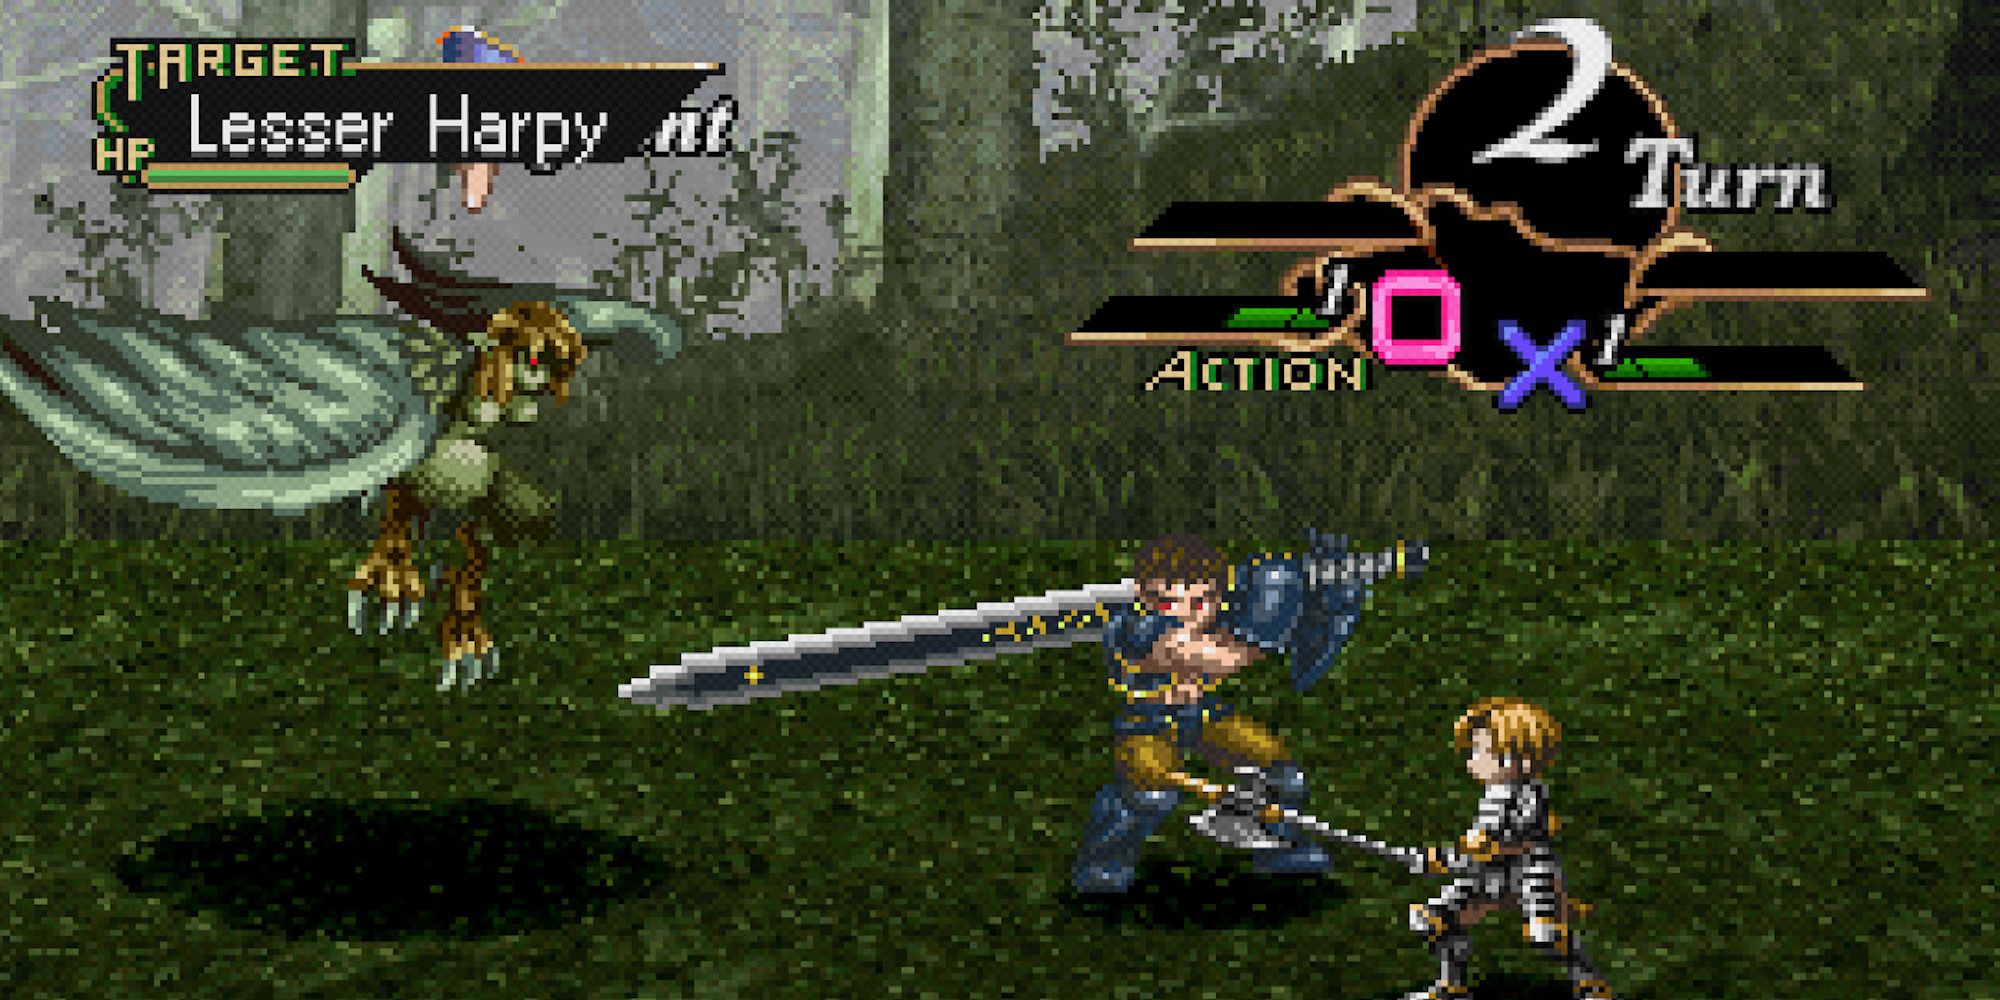 Fighting a battle in Valkyrie Profile